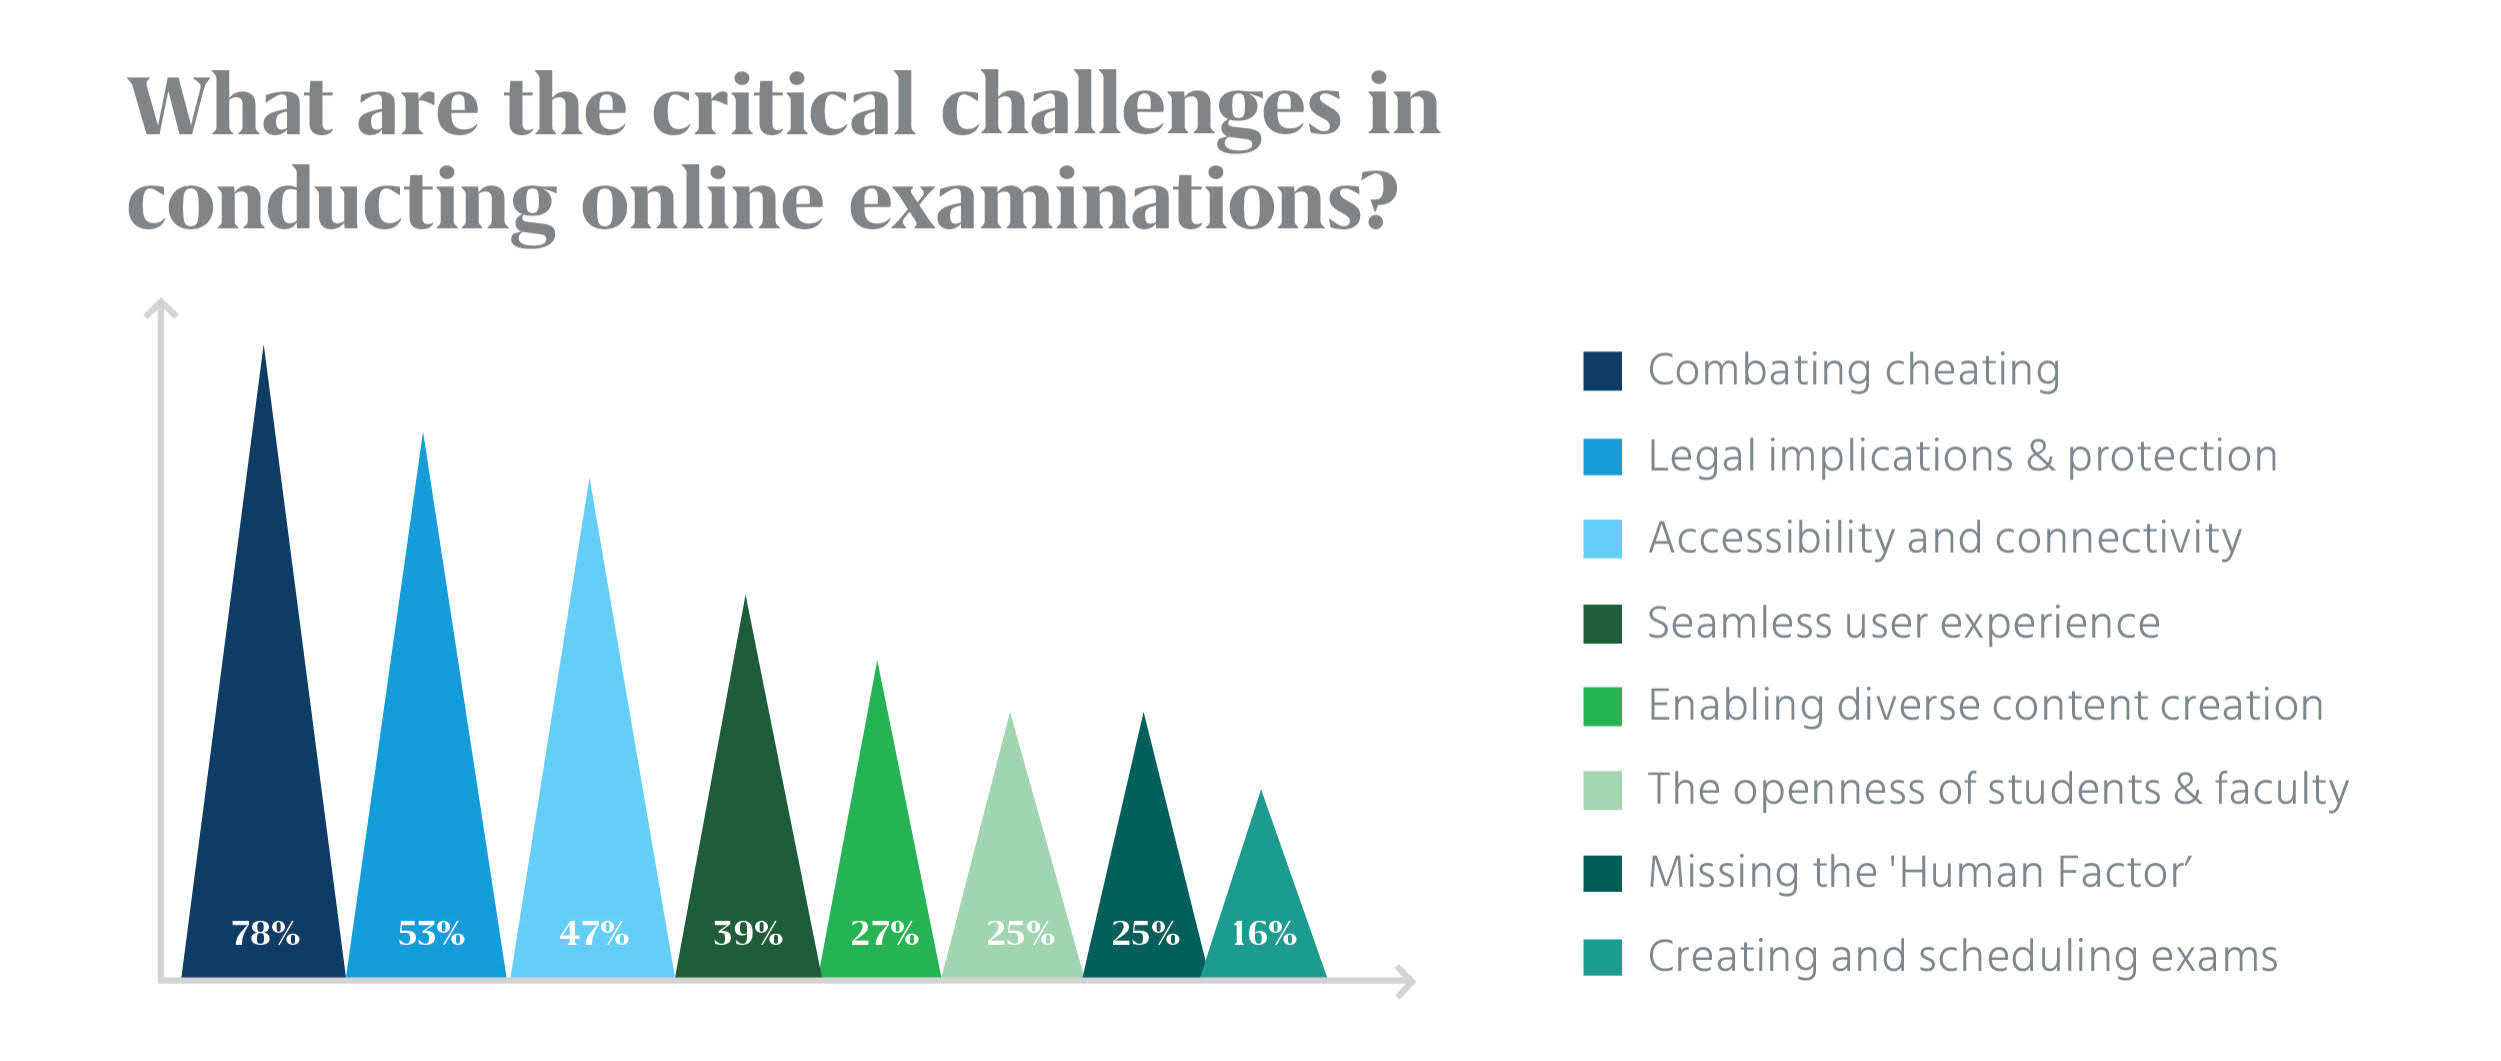 What are the critical challenges in conducting online examinations?